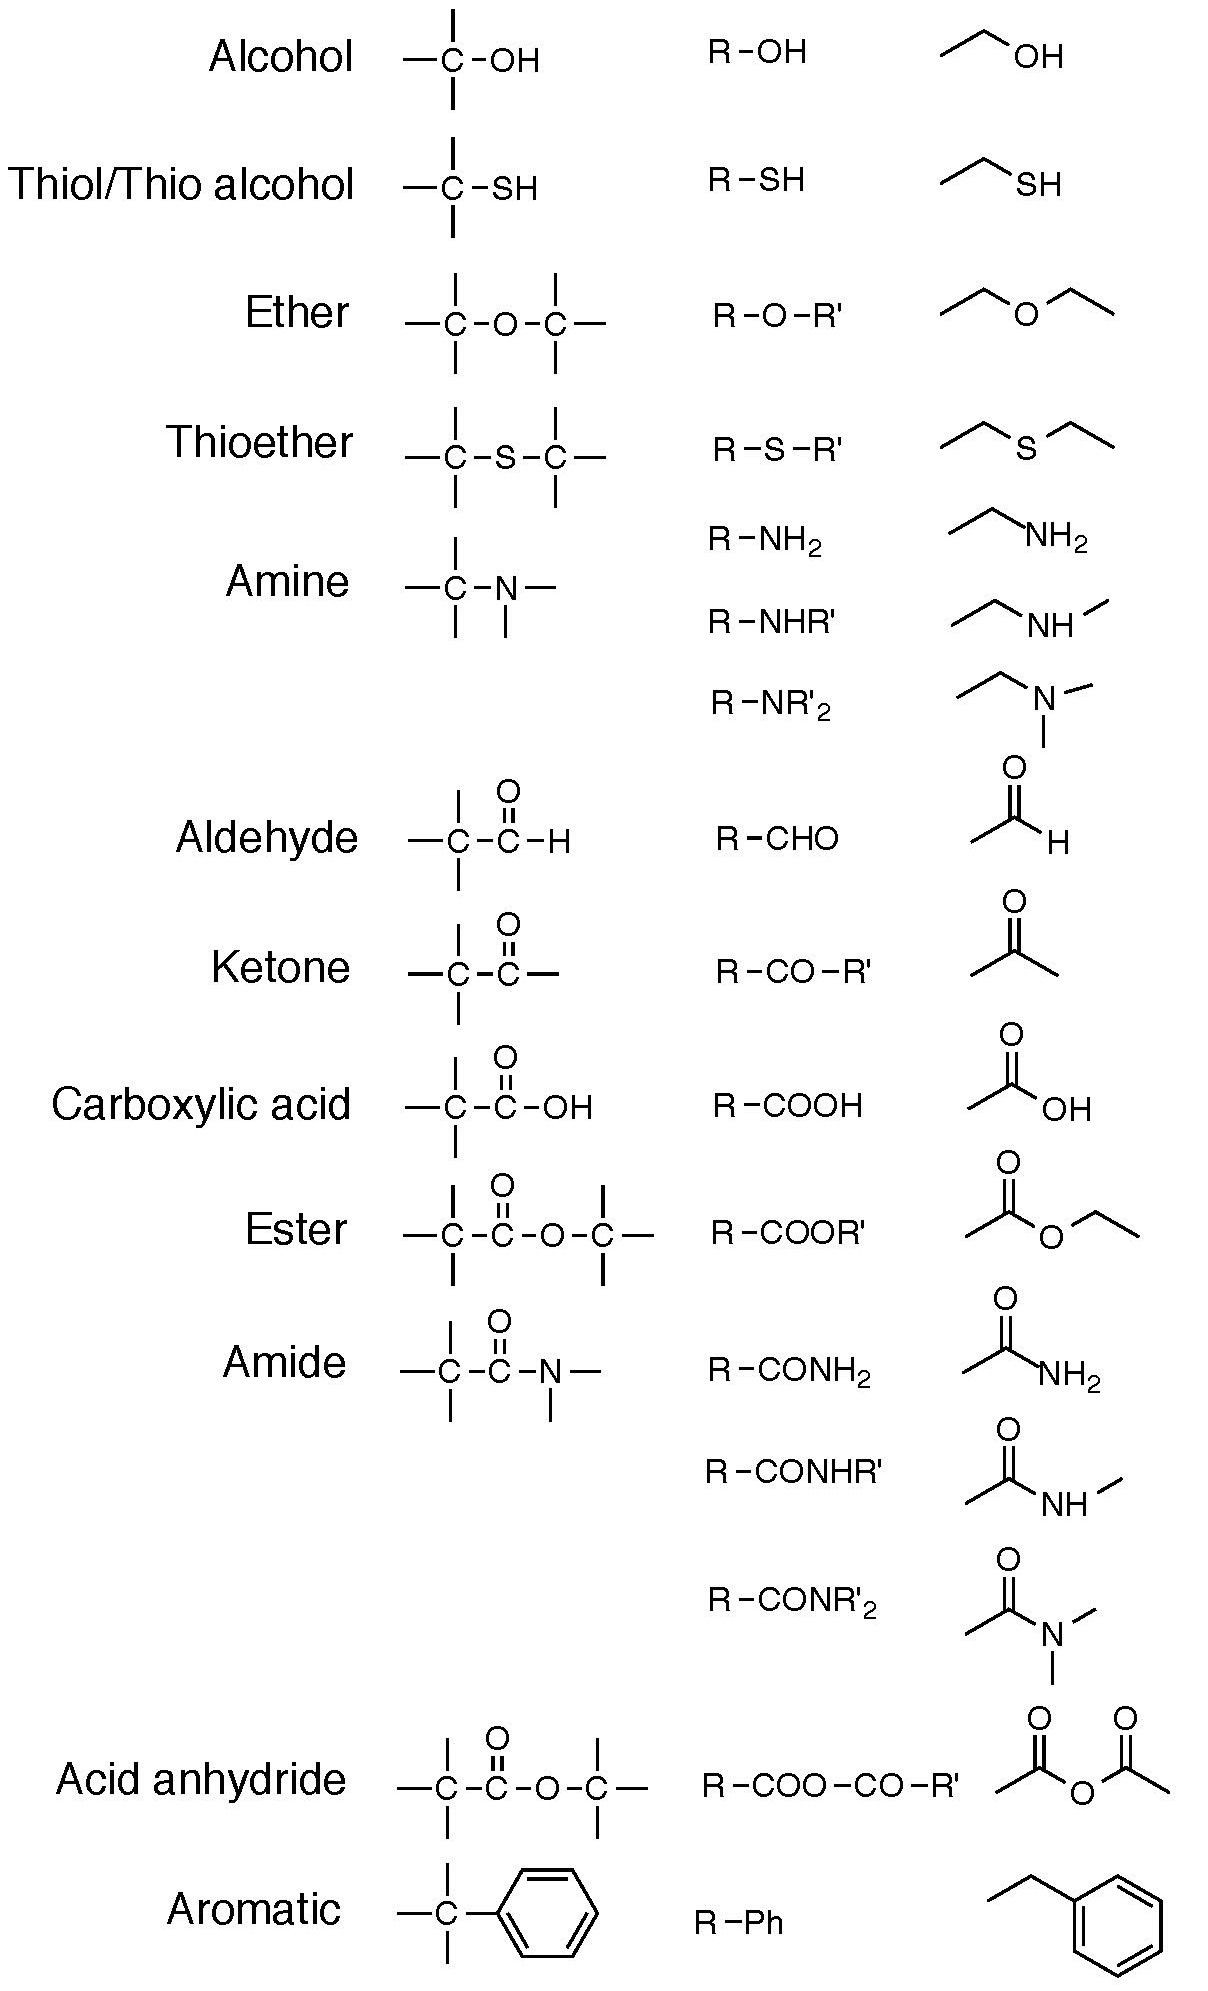 Functional Group Practice Worksheet A Table Showing the Functional Groups for Alcohol Thiol